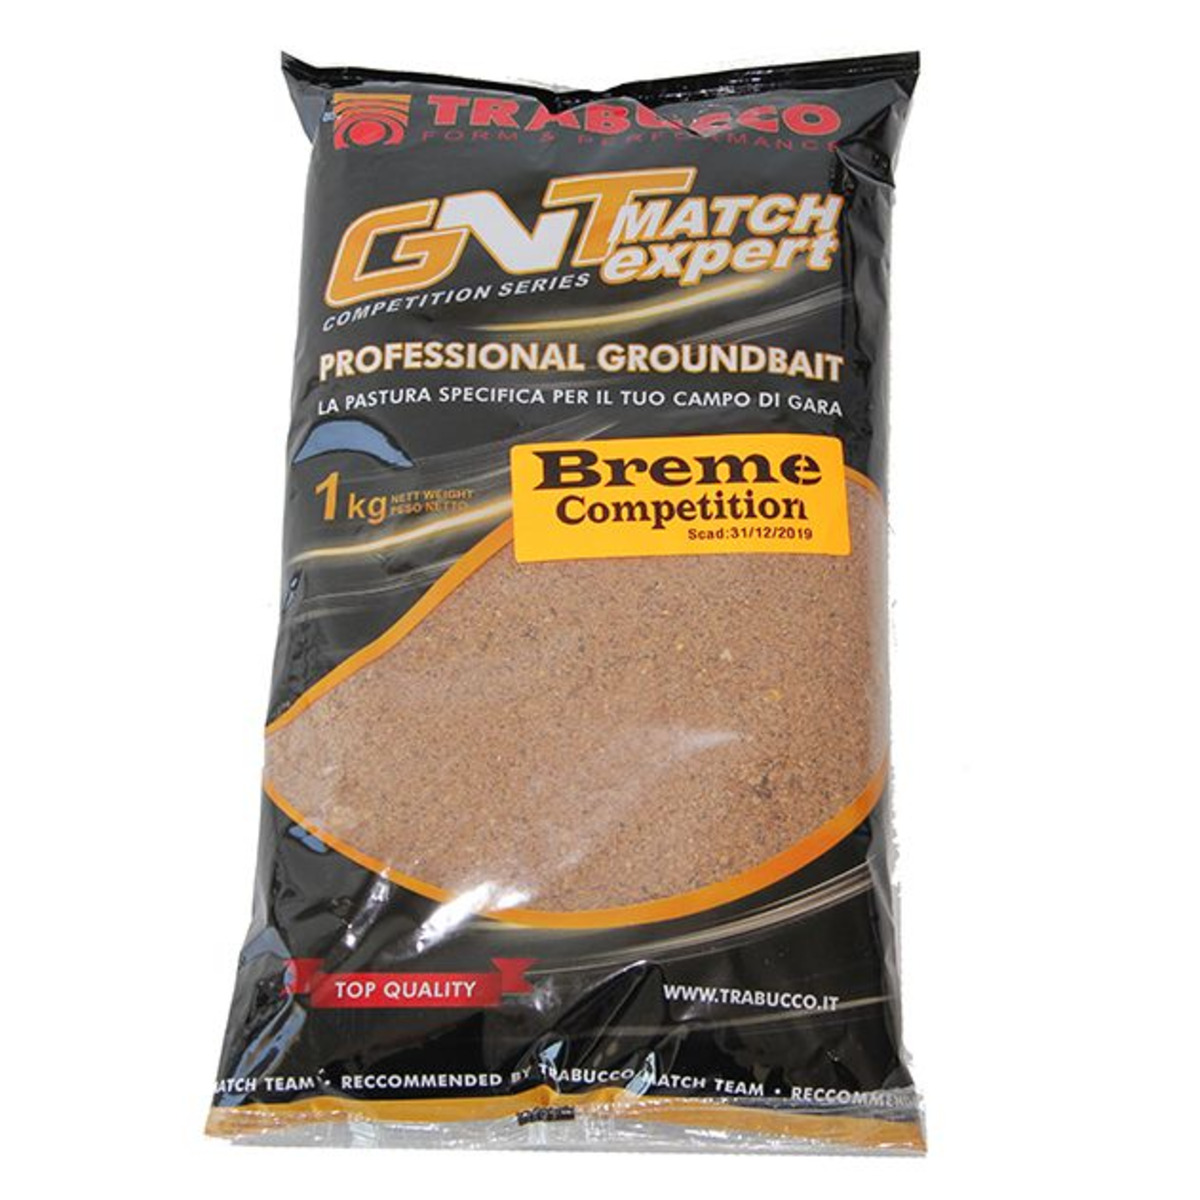 Trabucco GNT Match Expert Breme Competition - Breme Competition - 1 kg